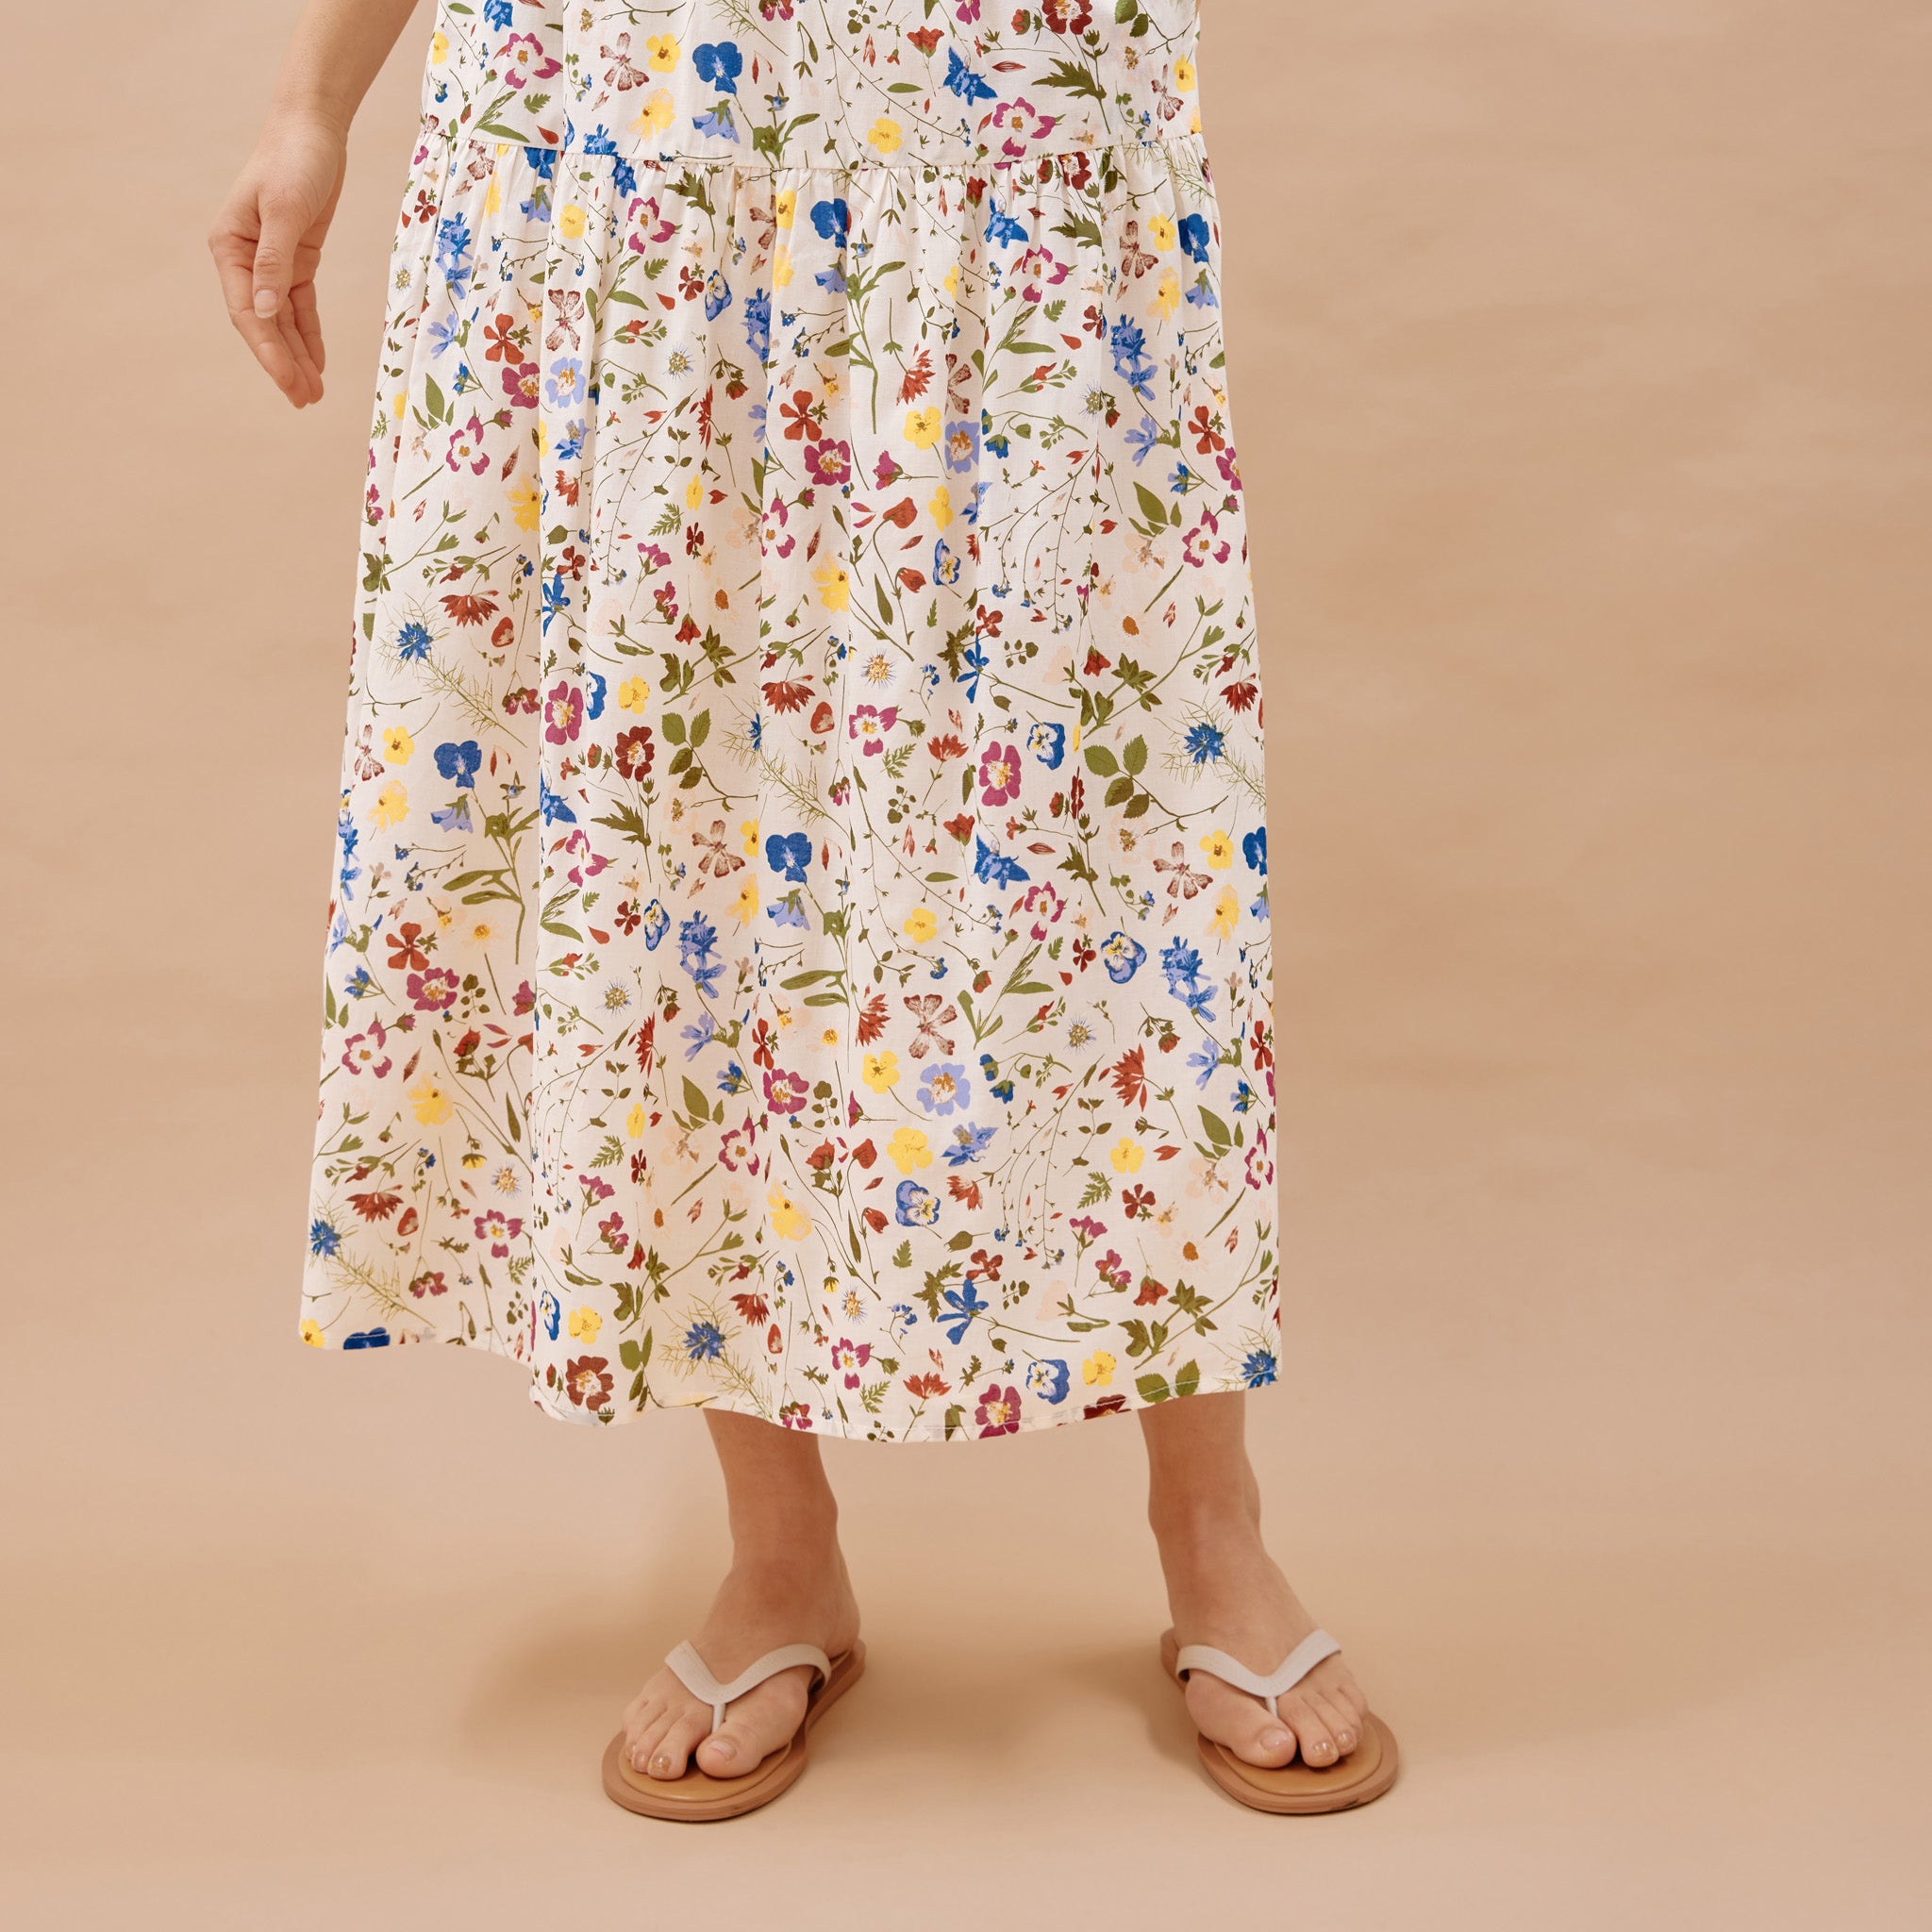 Buttercup Pressed Floral Skirt